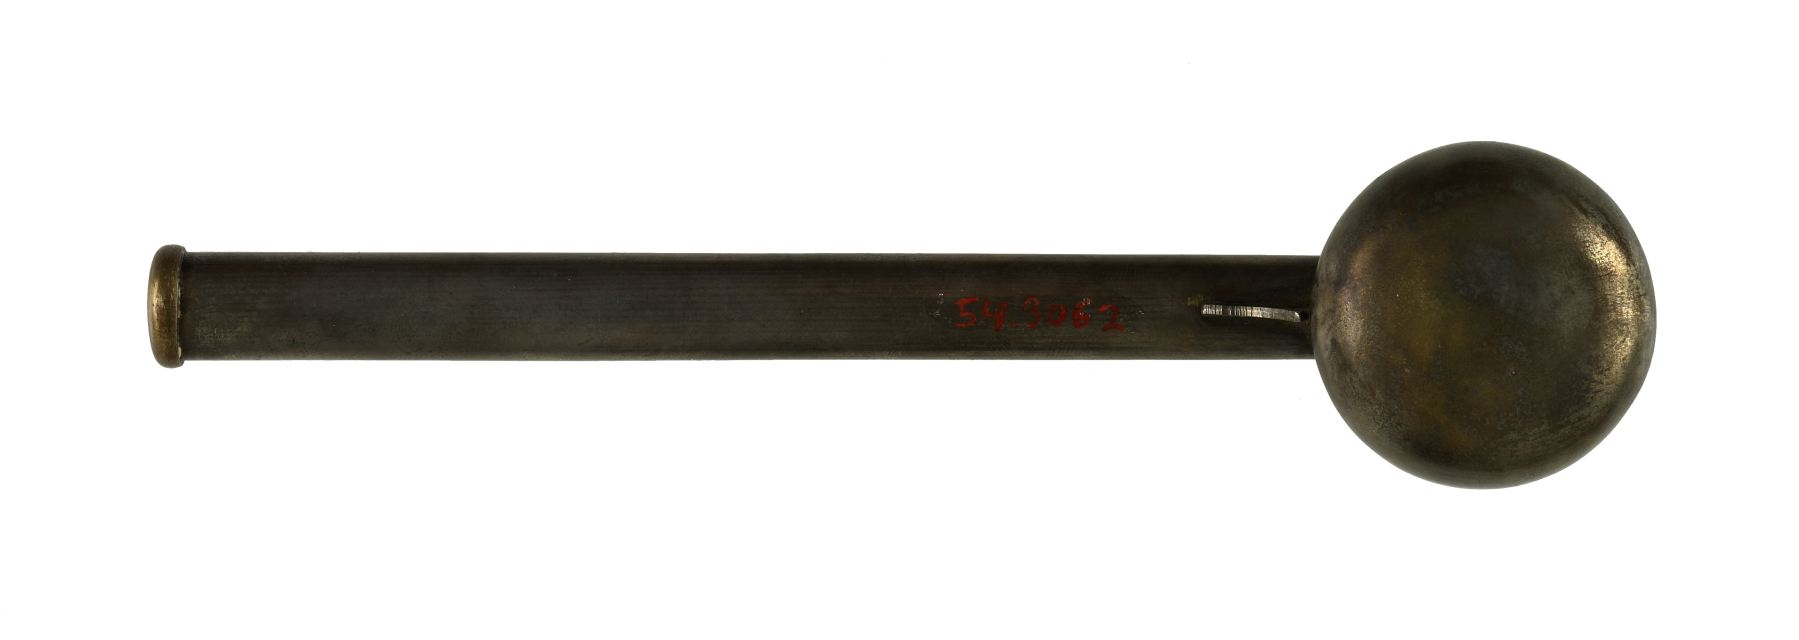 Image for "Yatate" with Etched Stem